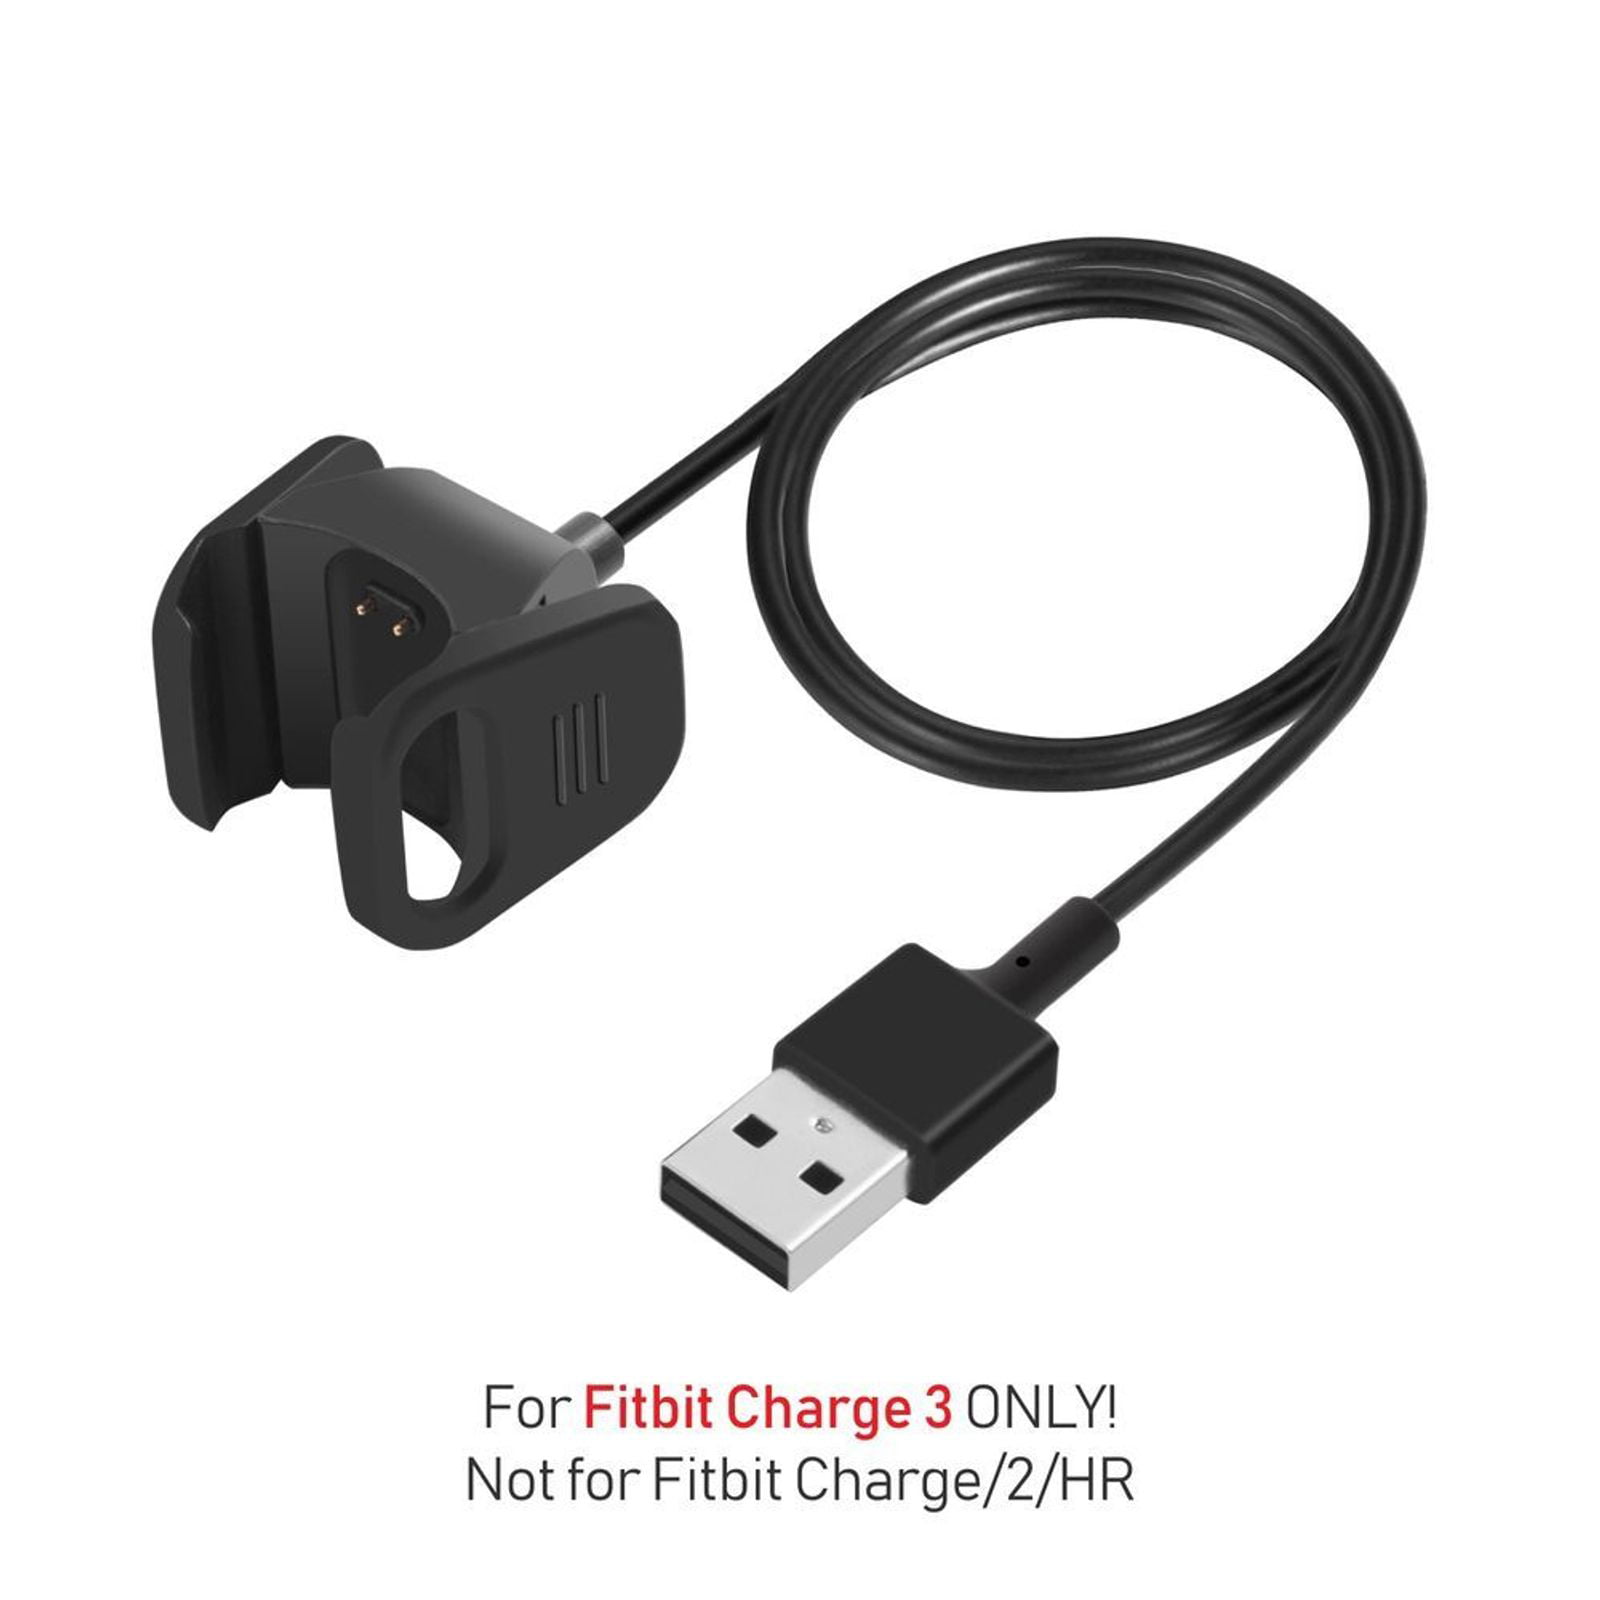 Black Charging Cable Charger Lead for Fitbit Charge 3 Fitness Tracker Wristband 